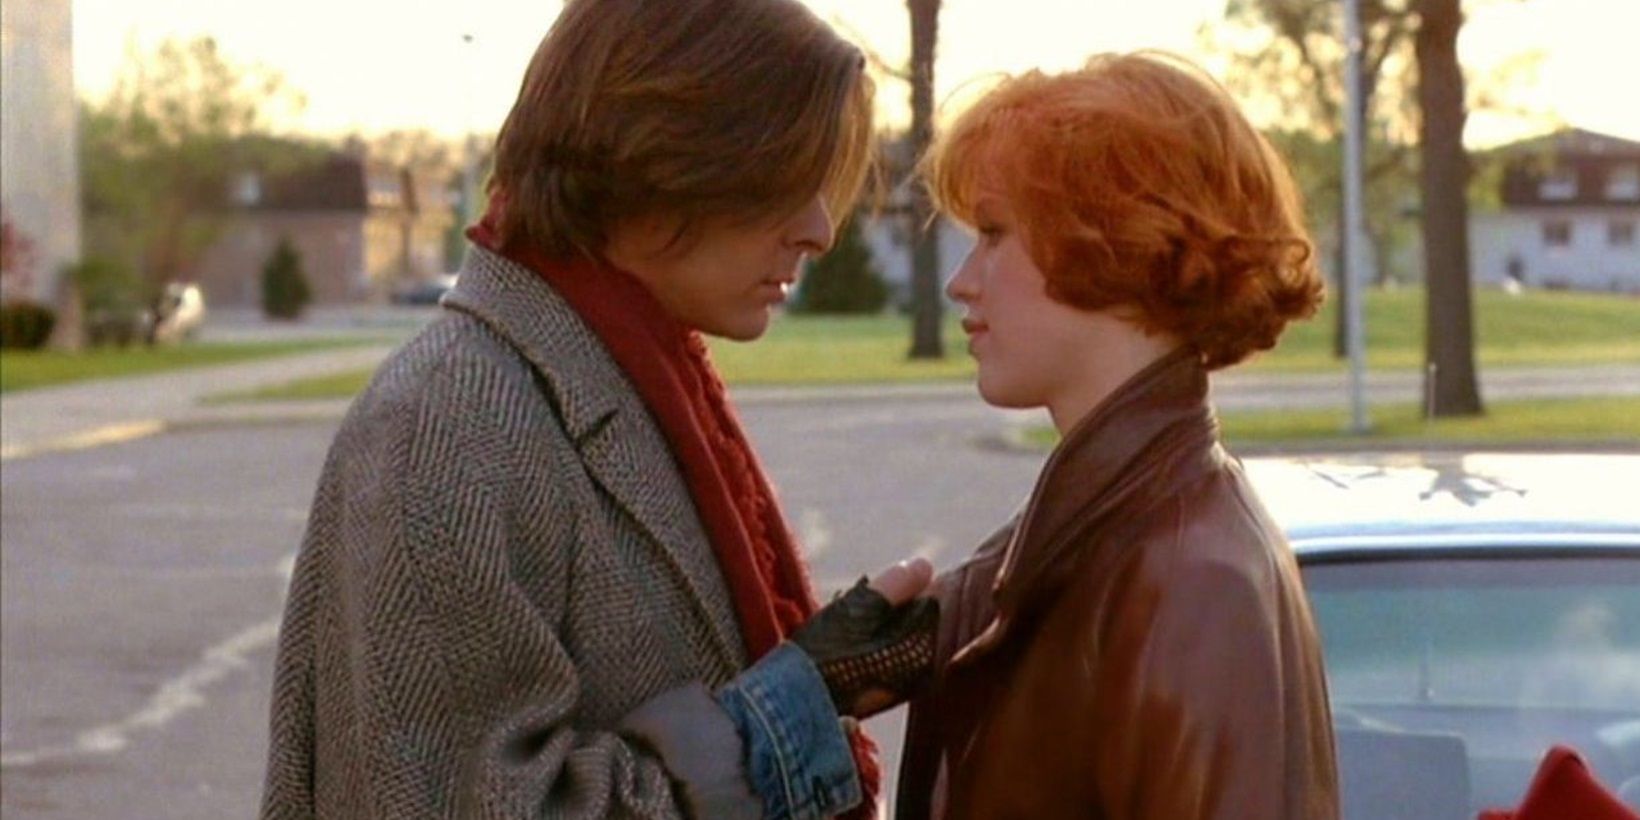 Bender and Claire embrace at the end of The Breakfast Club